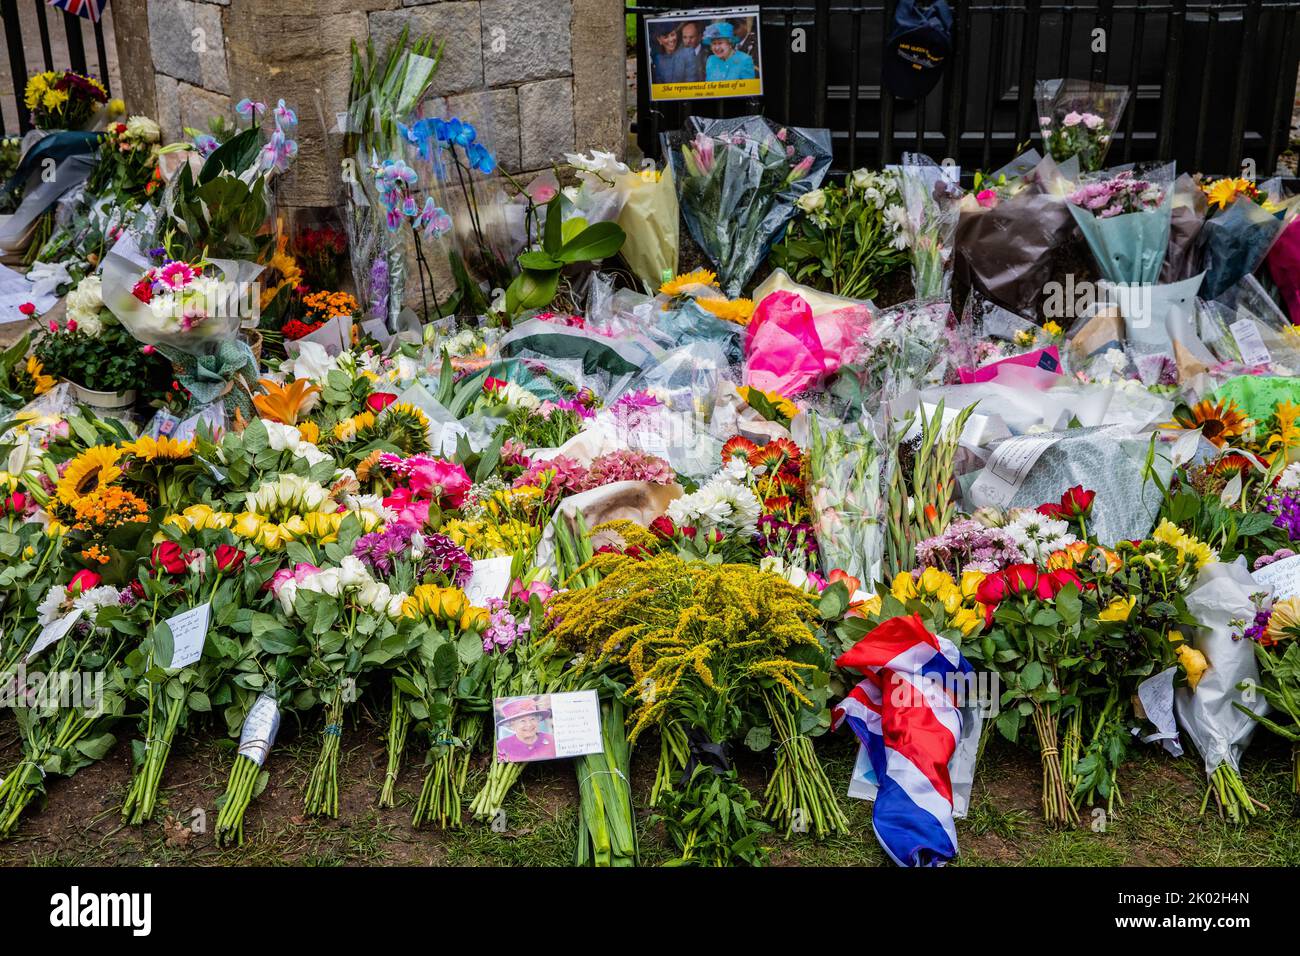 Windsor, UK. 9th Sep, 2022. Floral tributes are displayed outside Cambridge Gate at Windsor Castle a day after the death of Queen Elizabeth II. Queen Elizabeth II, the UK's longest-serving monarch, died at Balmoral aged 96 after a reign lasting 70 years. Credit: Mark Kerrison/Alamy Live News Stock Photo